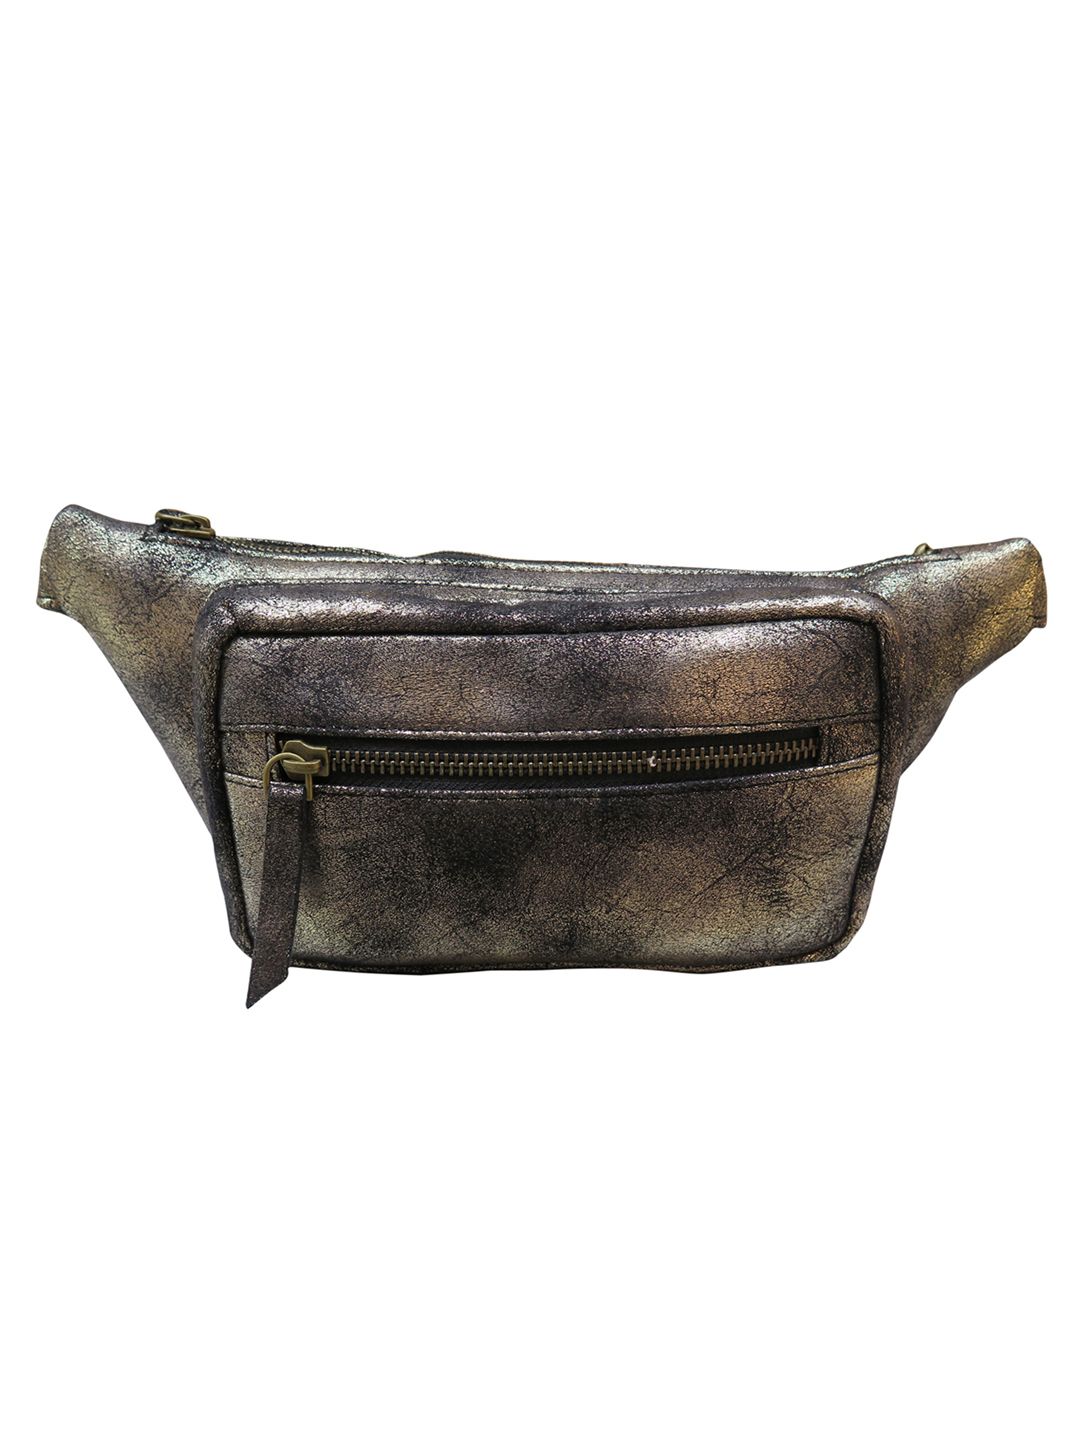 Spice Art Unisex Copper-Toned Solid Fanny Pack With Antique Finish Detail Price in India